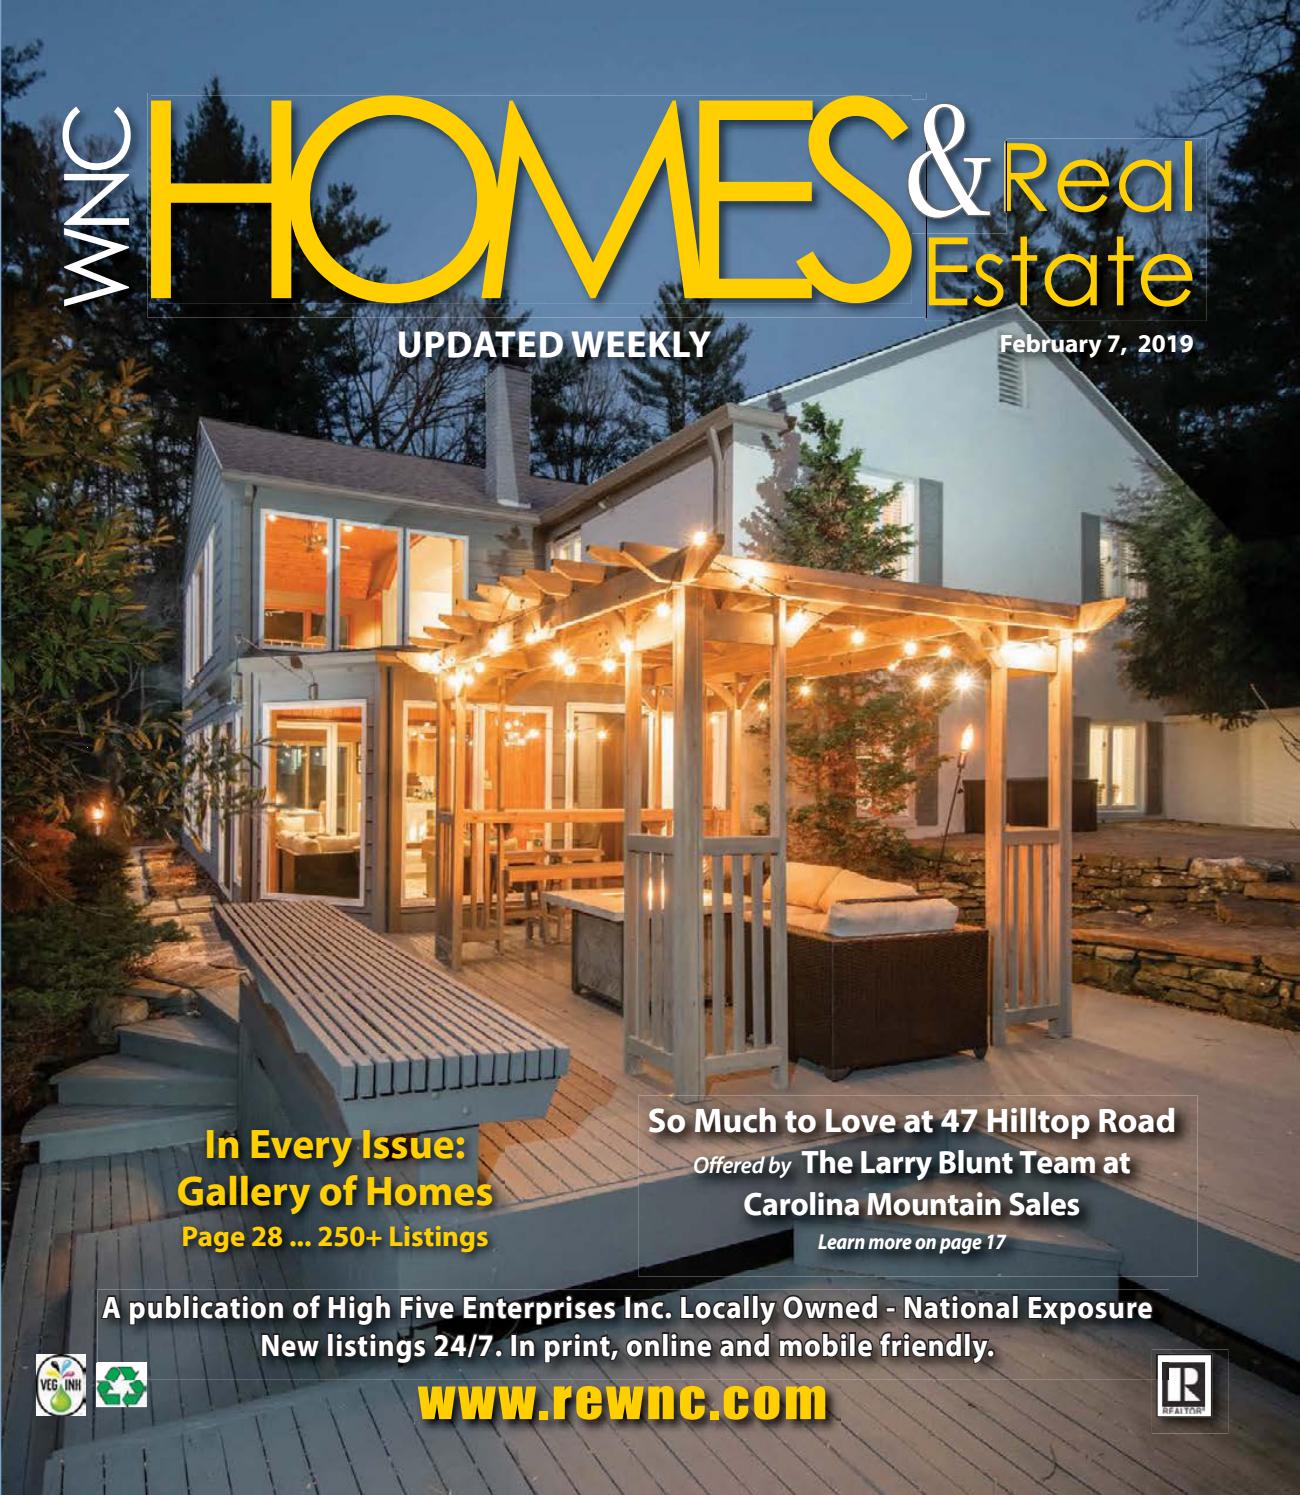 Fireplace asheville Luxury Vol 30 February 2 by Wnc Homes & Real Estate issuu